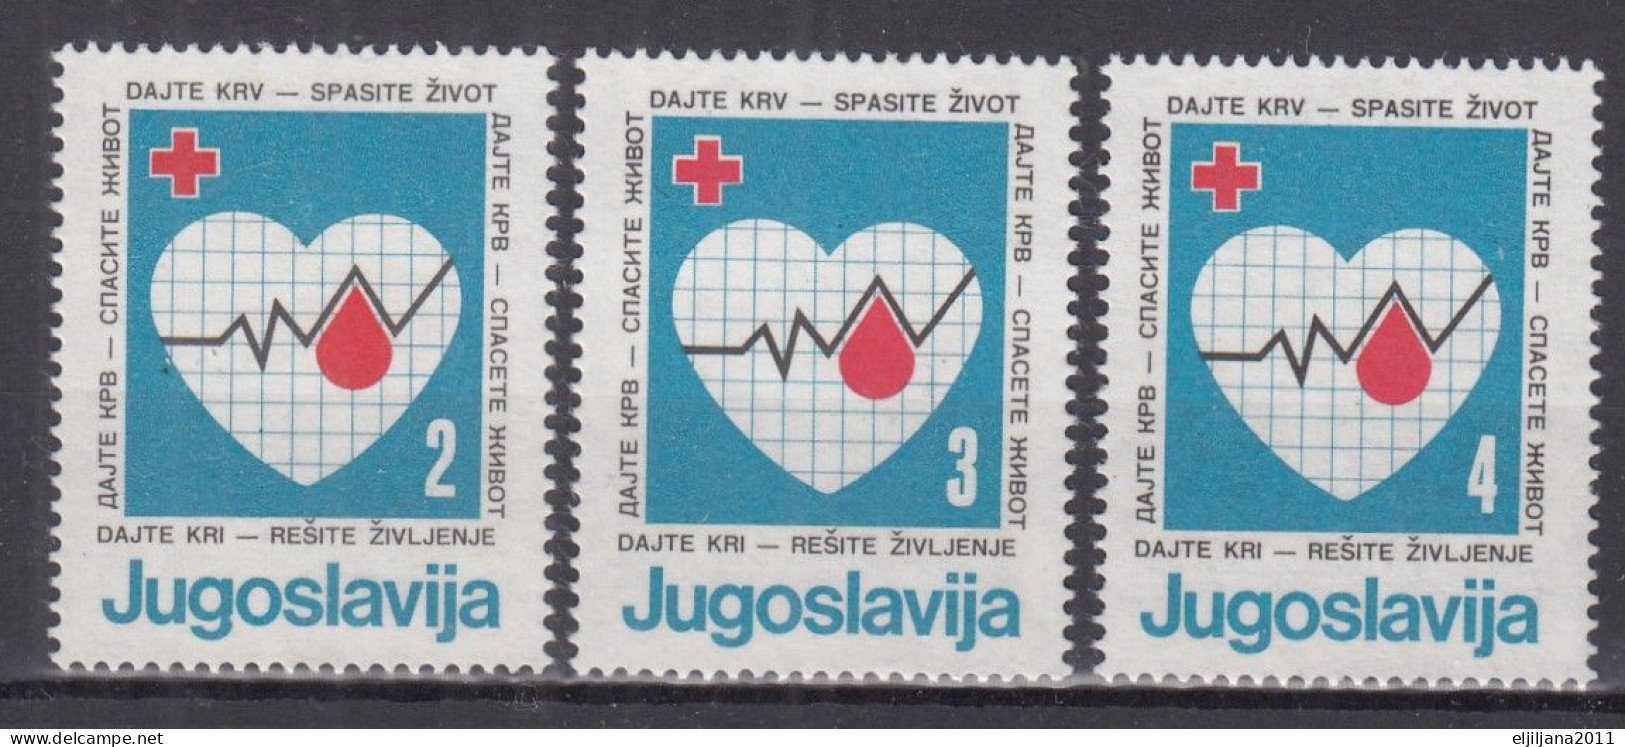 ⁕ Yugoslavia 1986 ⁕ Red Cross / Give Blood - Save A Life Mi.105-107 ⁕ 3v Unused - Charity Issues